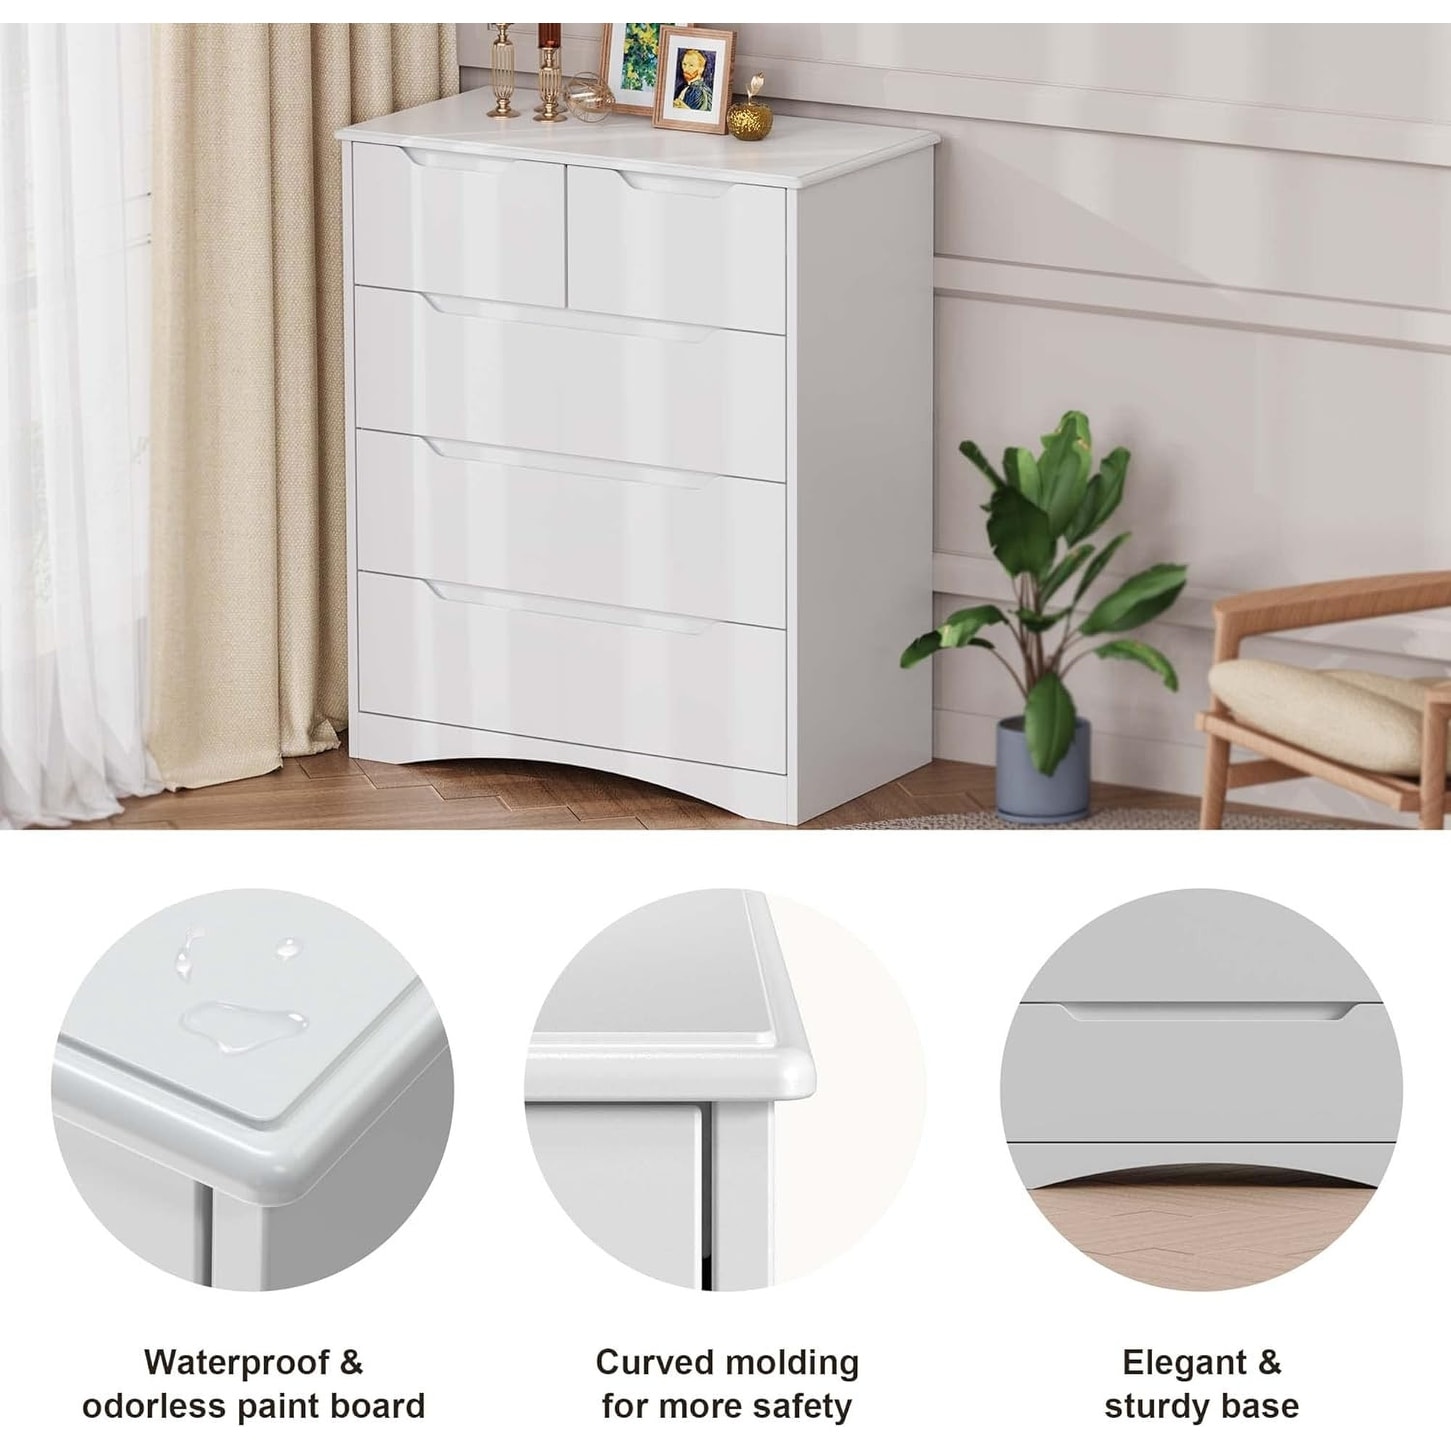 https://ak1.ostkcdn.com/images/products/is/images/direct/5806b0b155b06973c71b1f17732a7b9ba1dcf4a6/Gizoon-5-Drawers-Chest%2C-White-Bedroom-Drawer-Dresser-and-Organizer-with-Large-Storage-Capacity%2C-Embedded-Handle.jpg